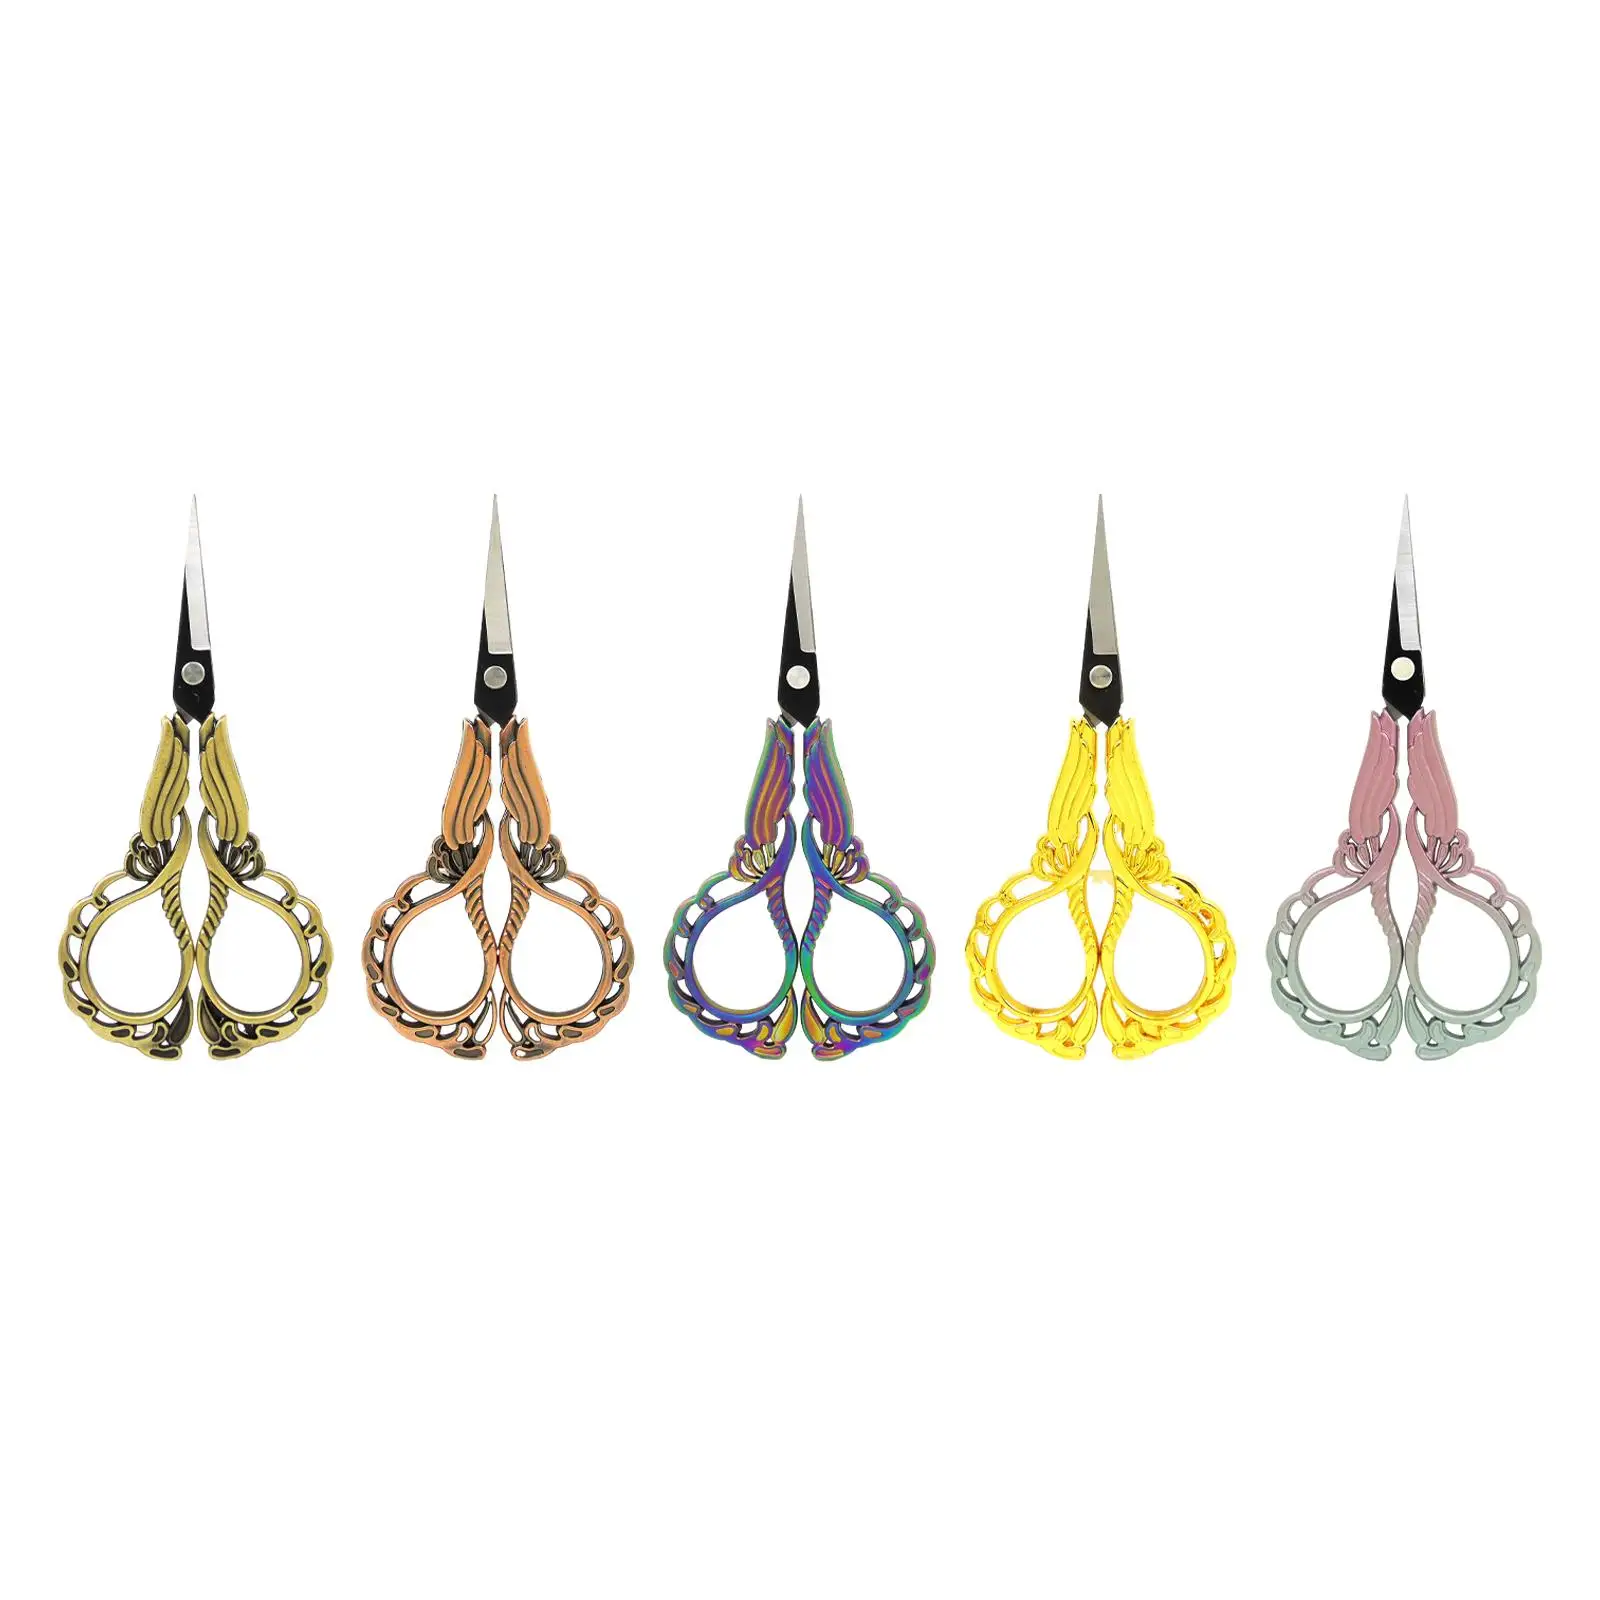 Embroidery Scissors Sewing for Thread Sewing Craft Supplies Crafting